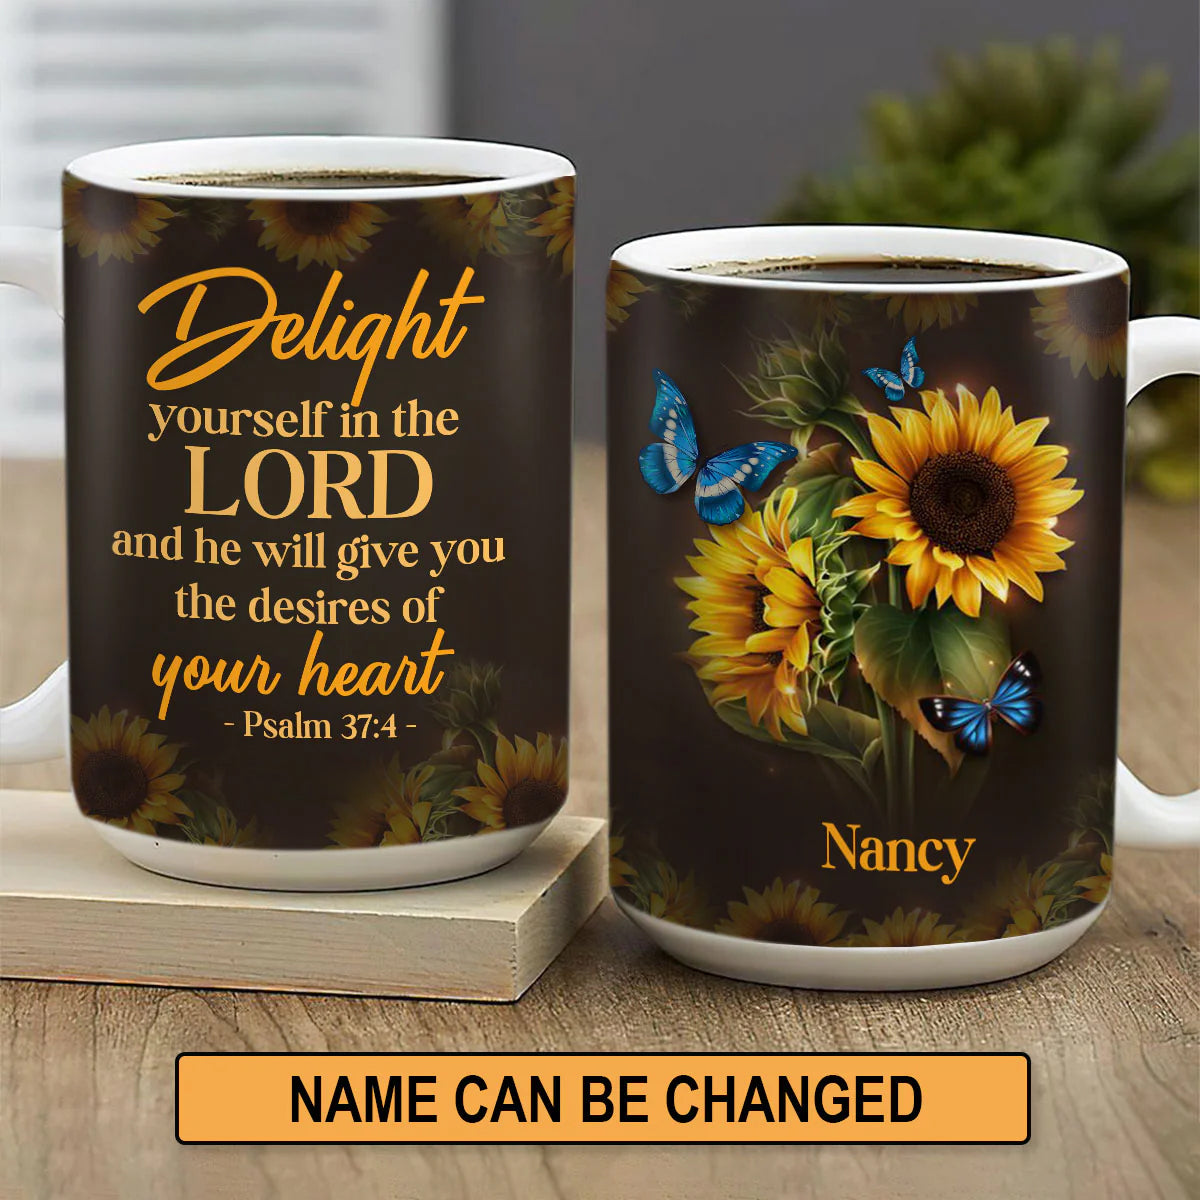 Christianartbag Drinkware, Delight Yourself In The Lord, Personalized Mug, Tumbler, Personalized Gift. - Christian Art Bag